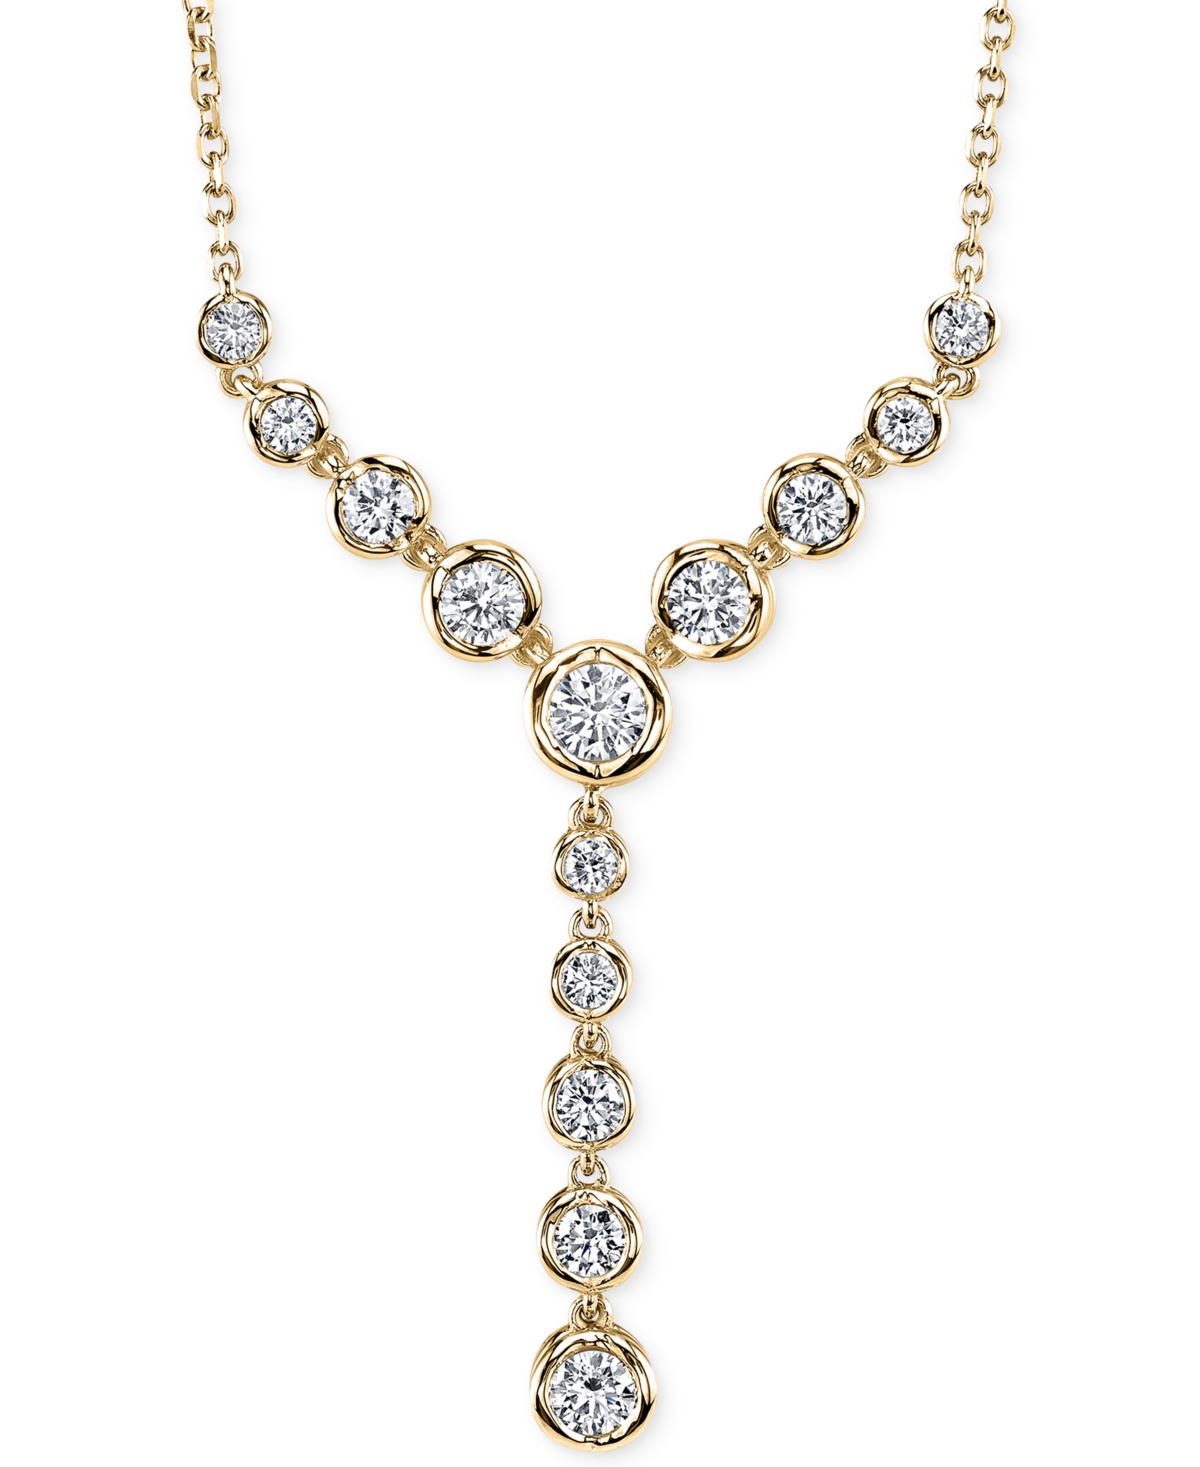 Diamond Lariat Necklace (1 ct. t.w) in 14k Gold or White Gold - Yellow Gold